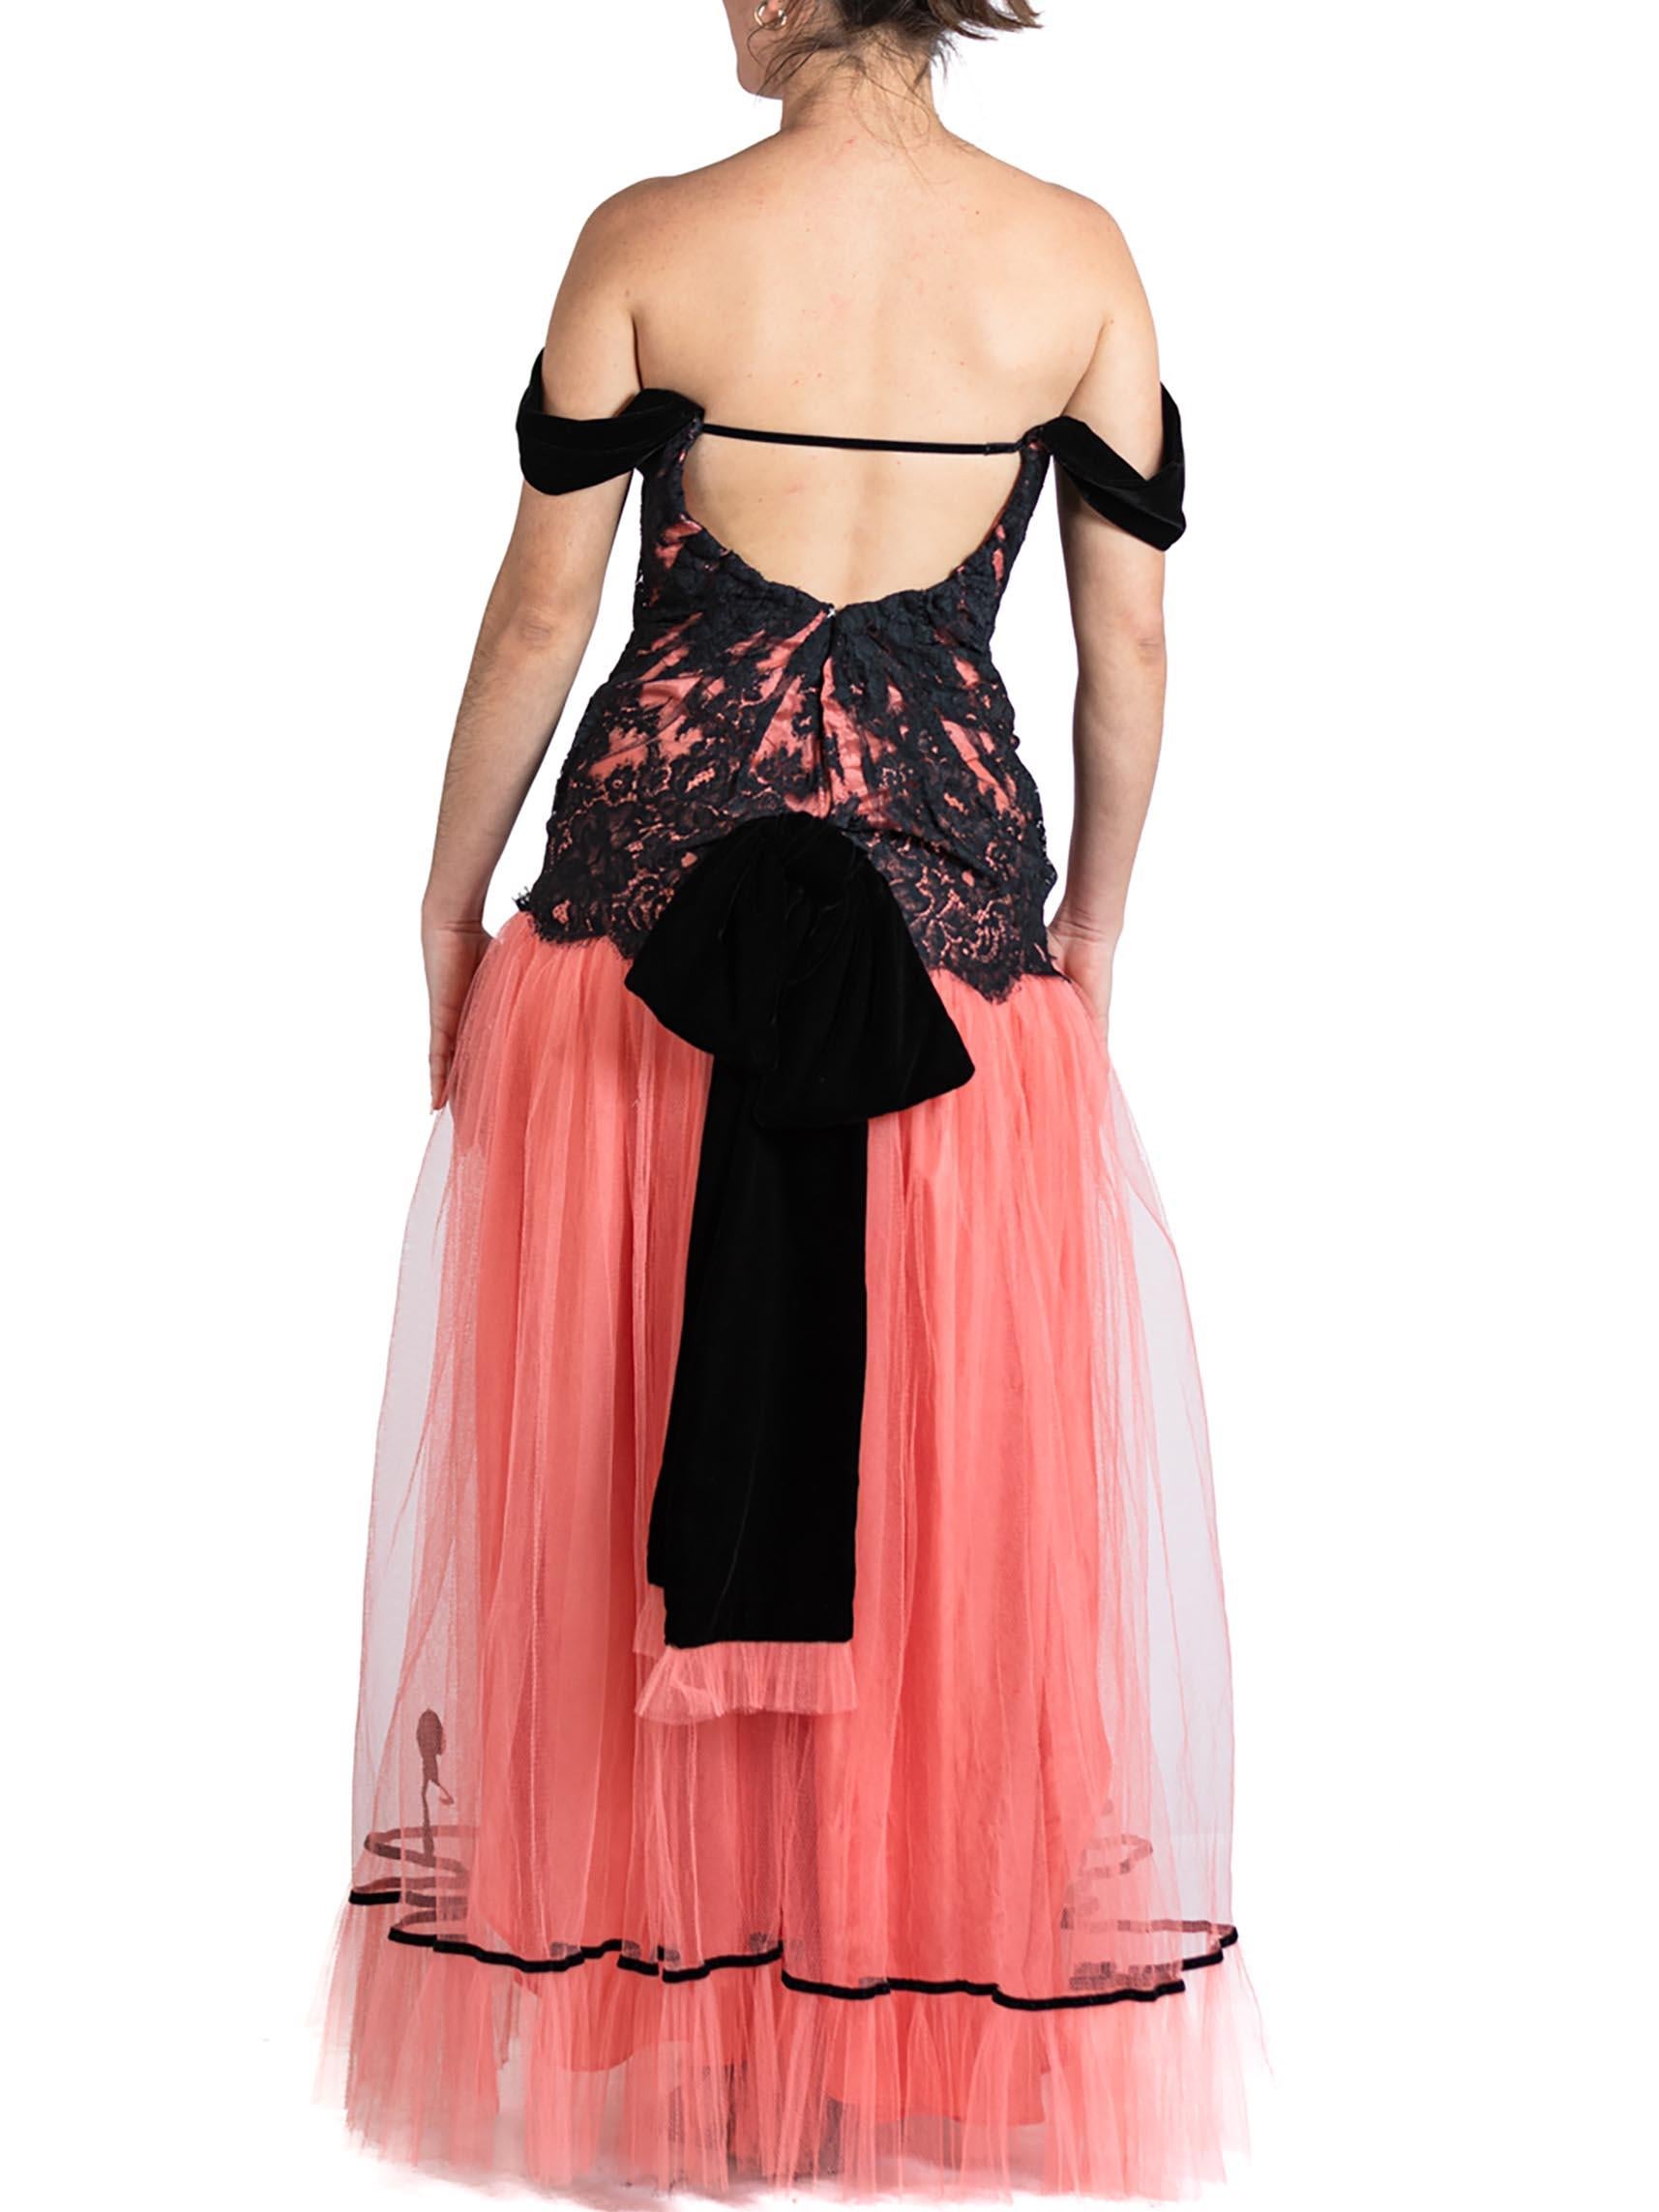 MORPHEW ATELIER Salmon Pink & Black Rayon Blend Tulle Lace Gown With Velvet Bow For Sale 2